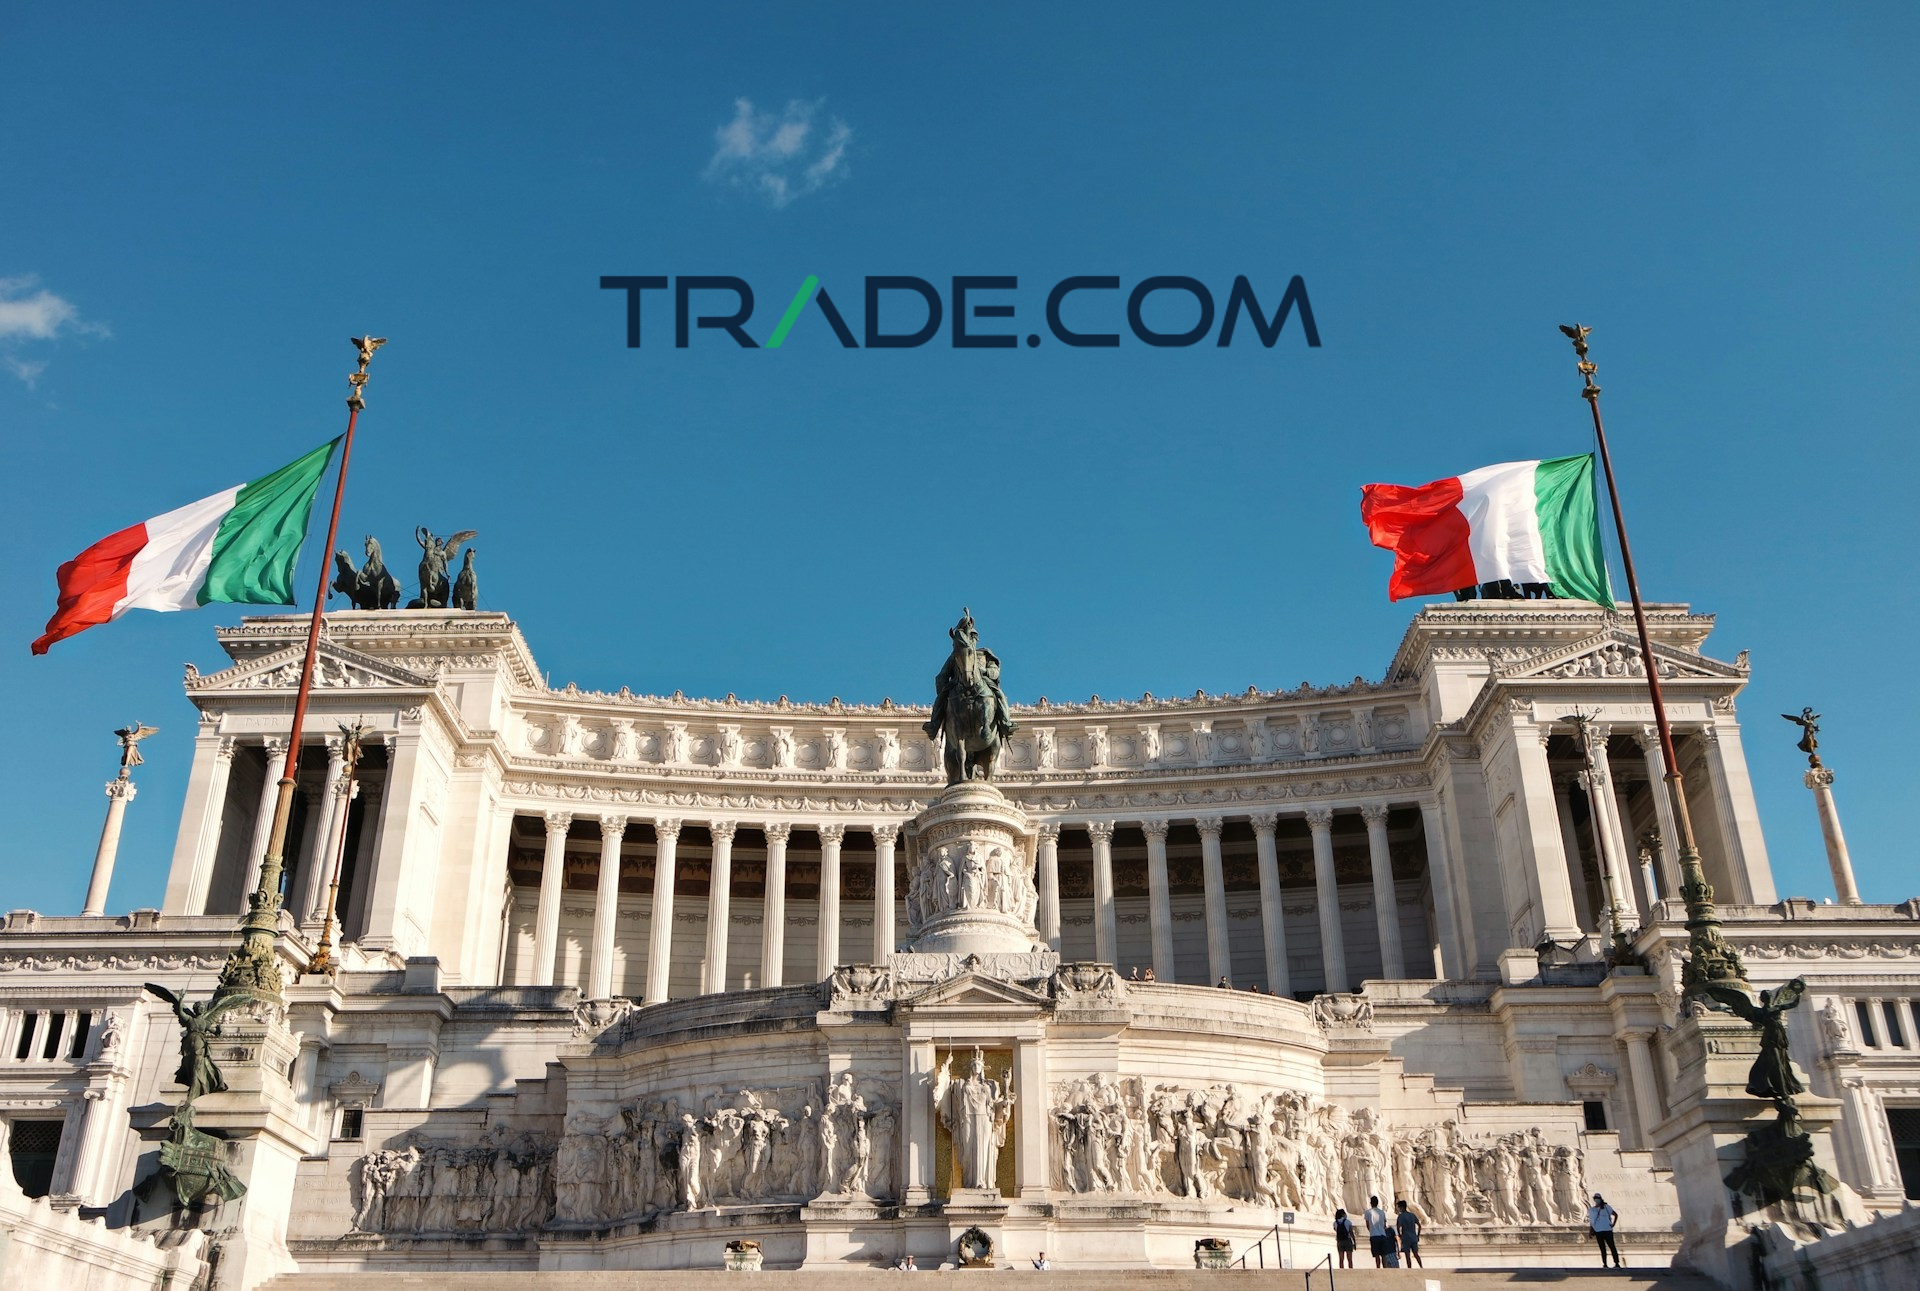 Online broker Trade.com expands to Italy under new license, partnering with banks as it introduces a trader capital funding program offering up to $200K.